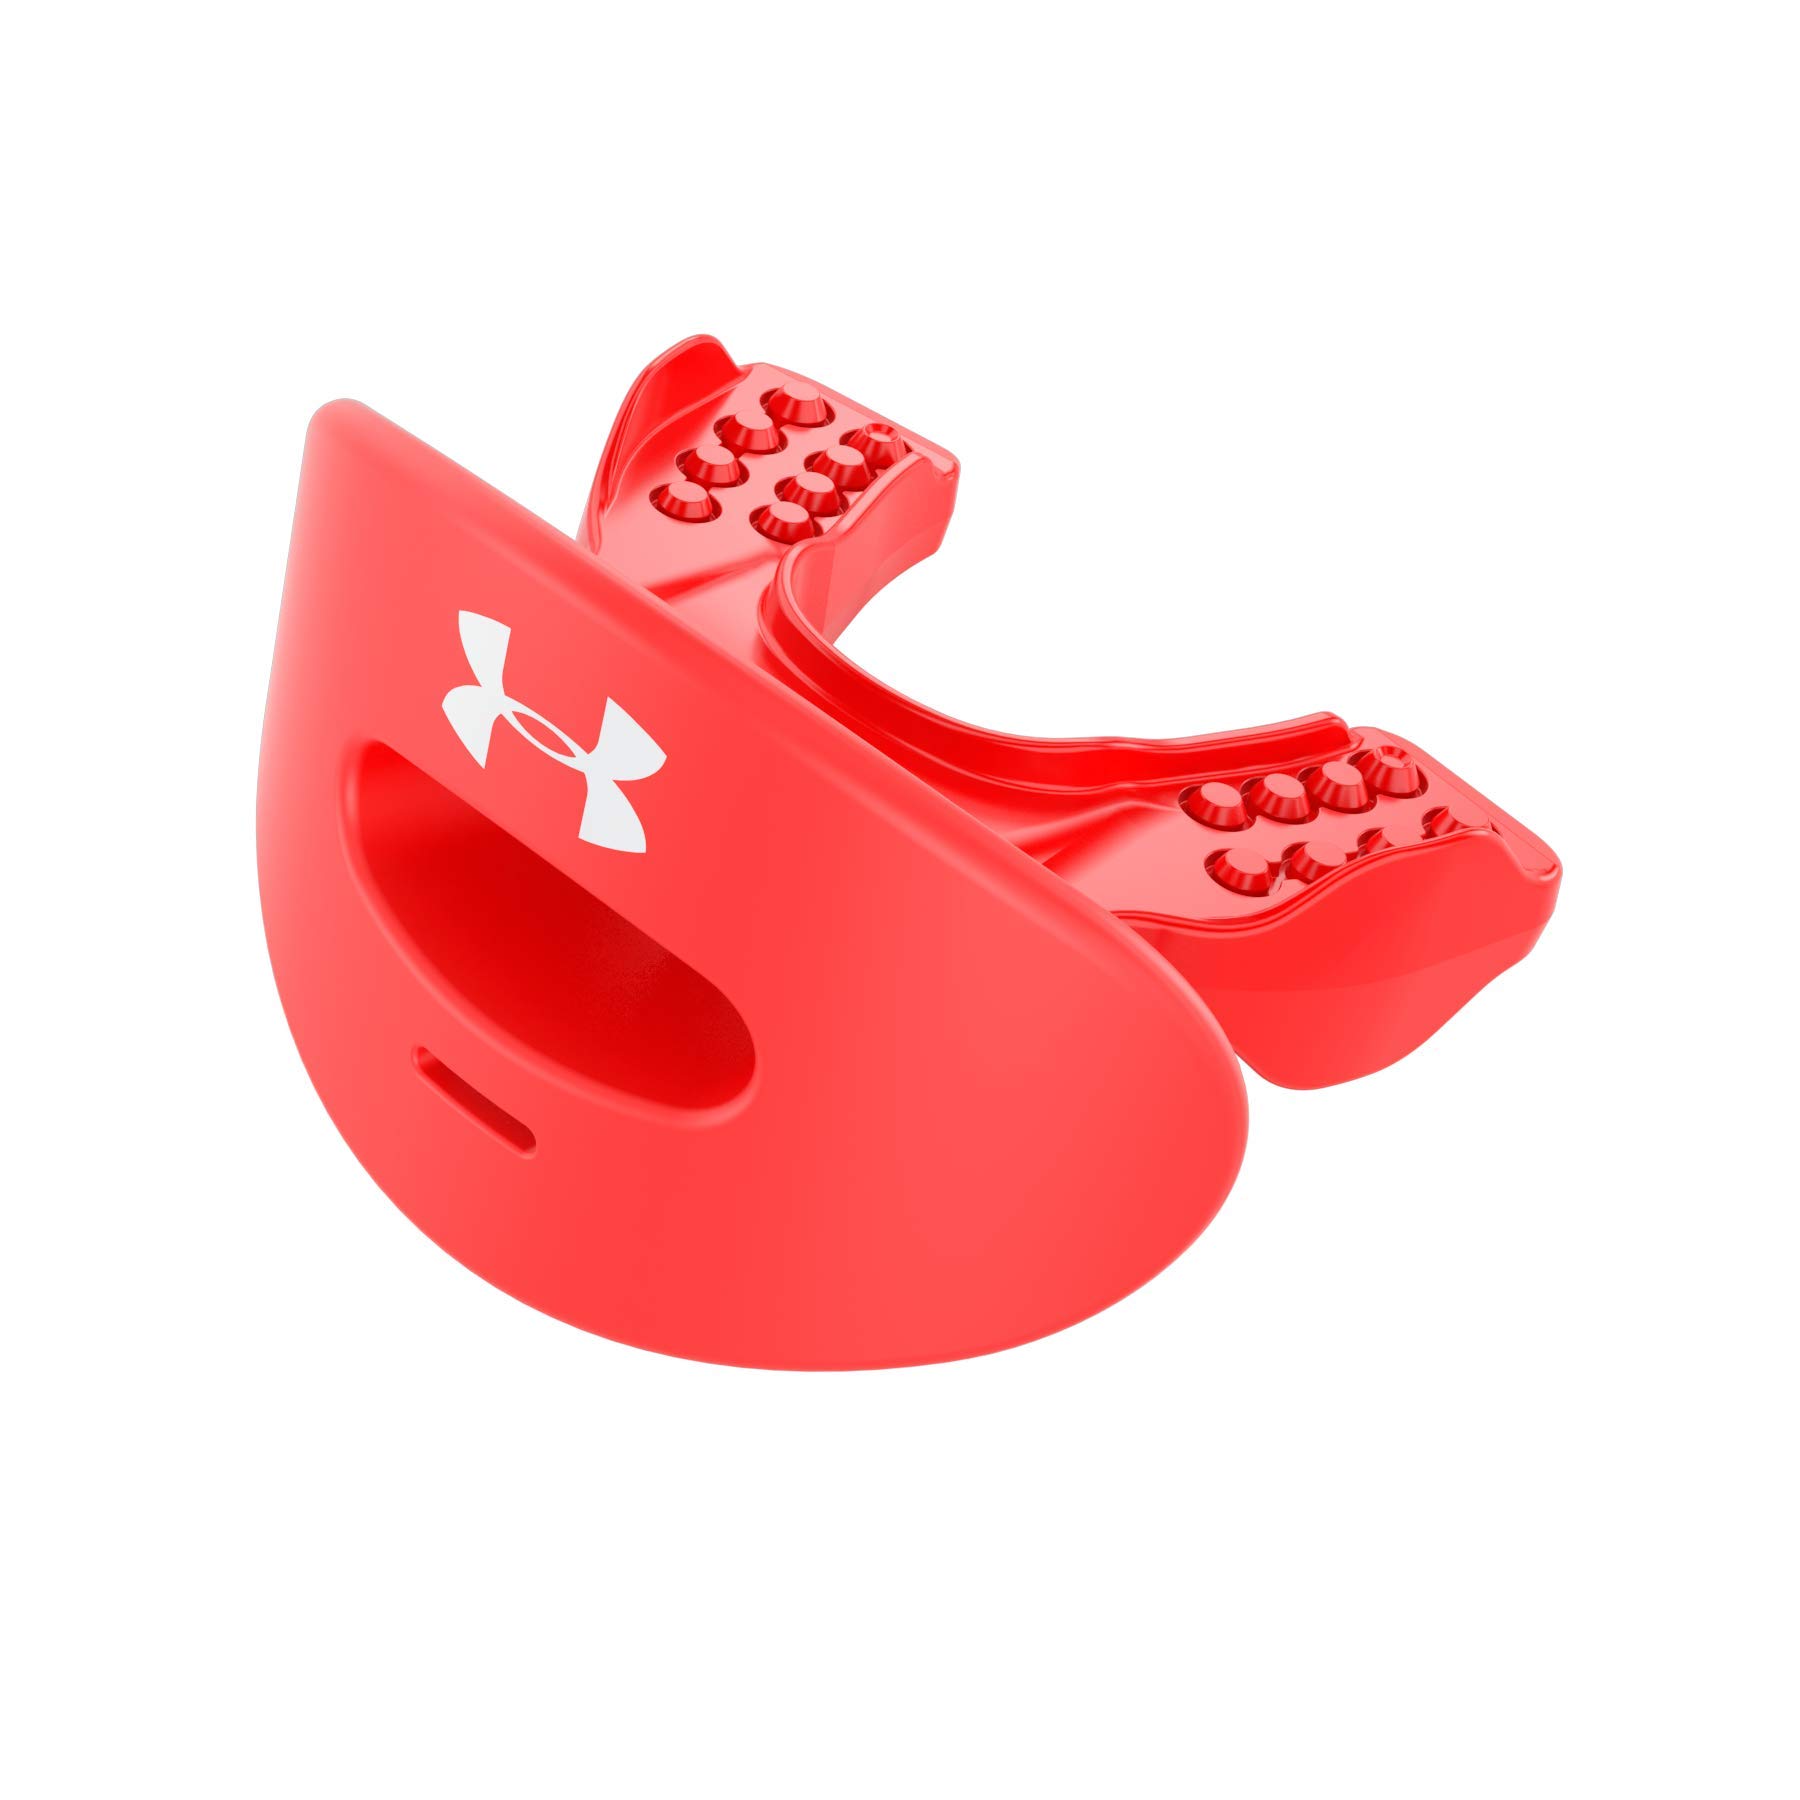 Under Armour Air Lip Guard for Football, Full Mouth Protection, Compatible with Braces, Instant Fit